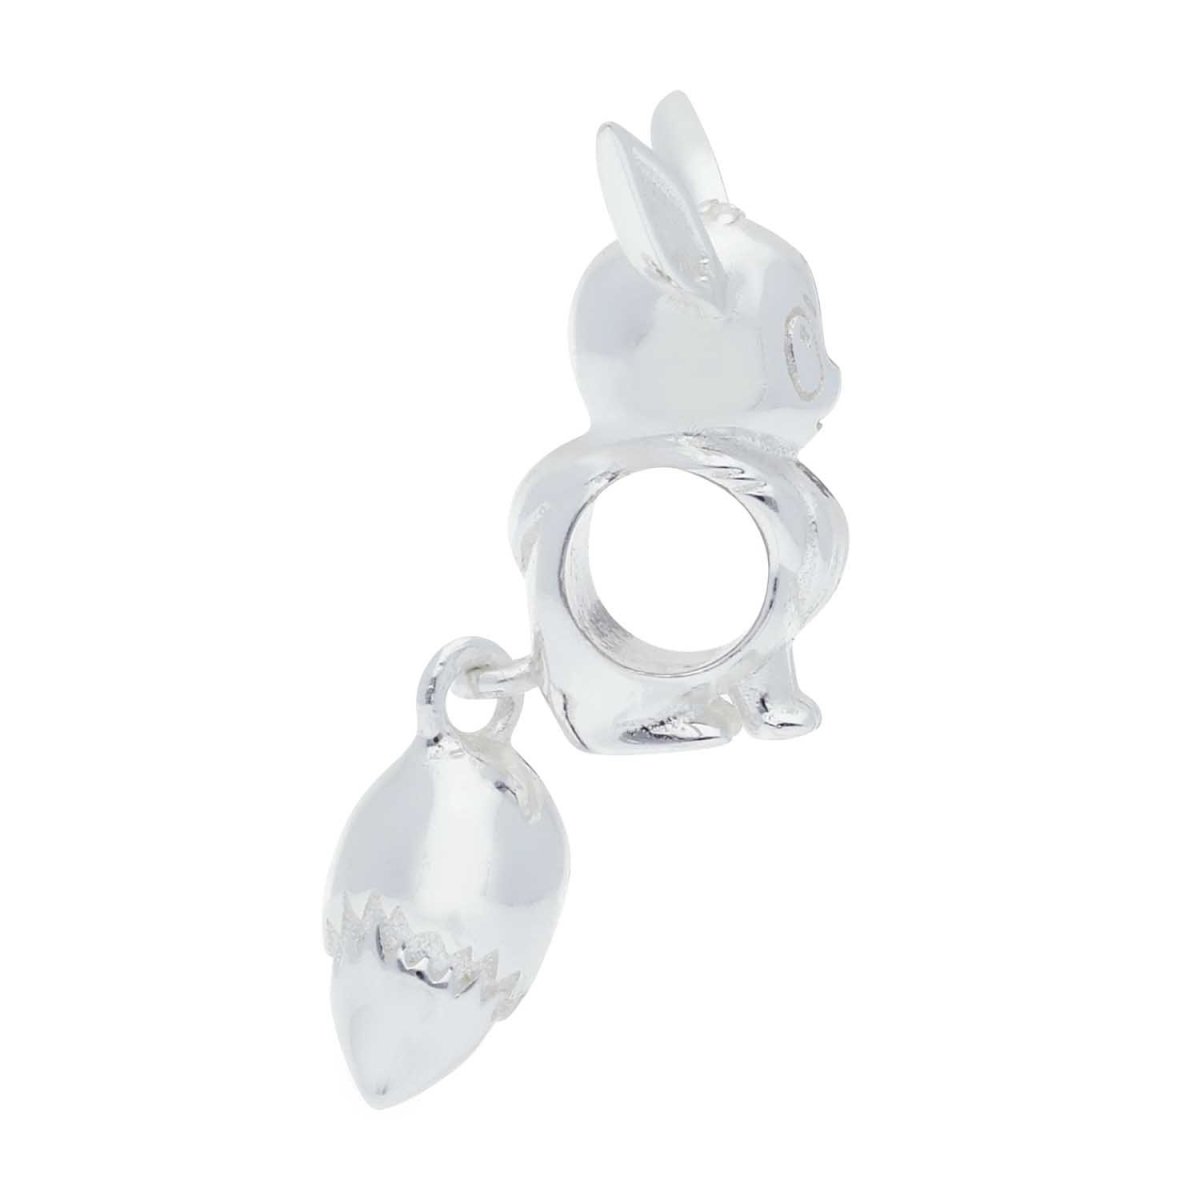 Pokémon Jewelry - Charms: Eevee Sterling Silver Full-Body Charm ...